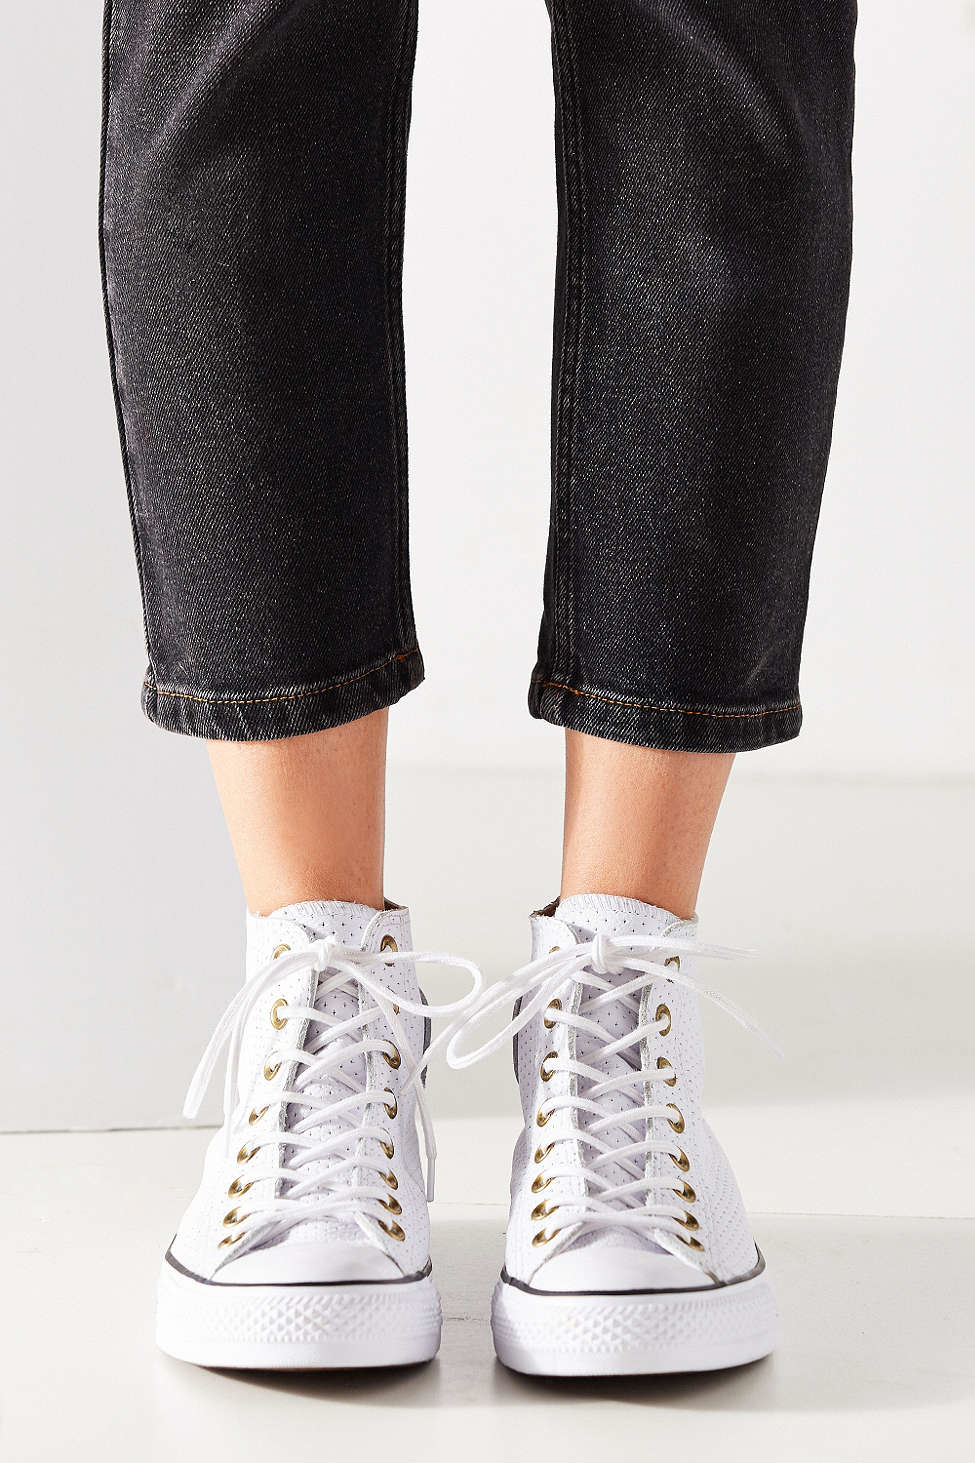 Converse Chuck Taylor Perforated Leather Sneaker in White | Lyst